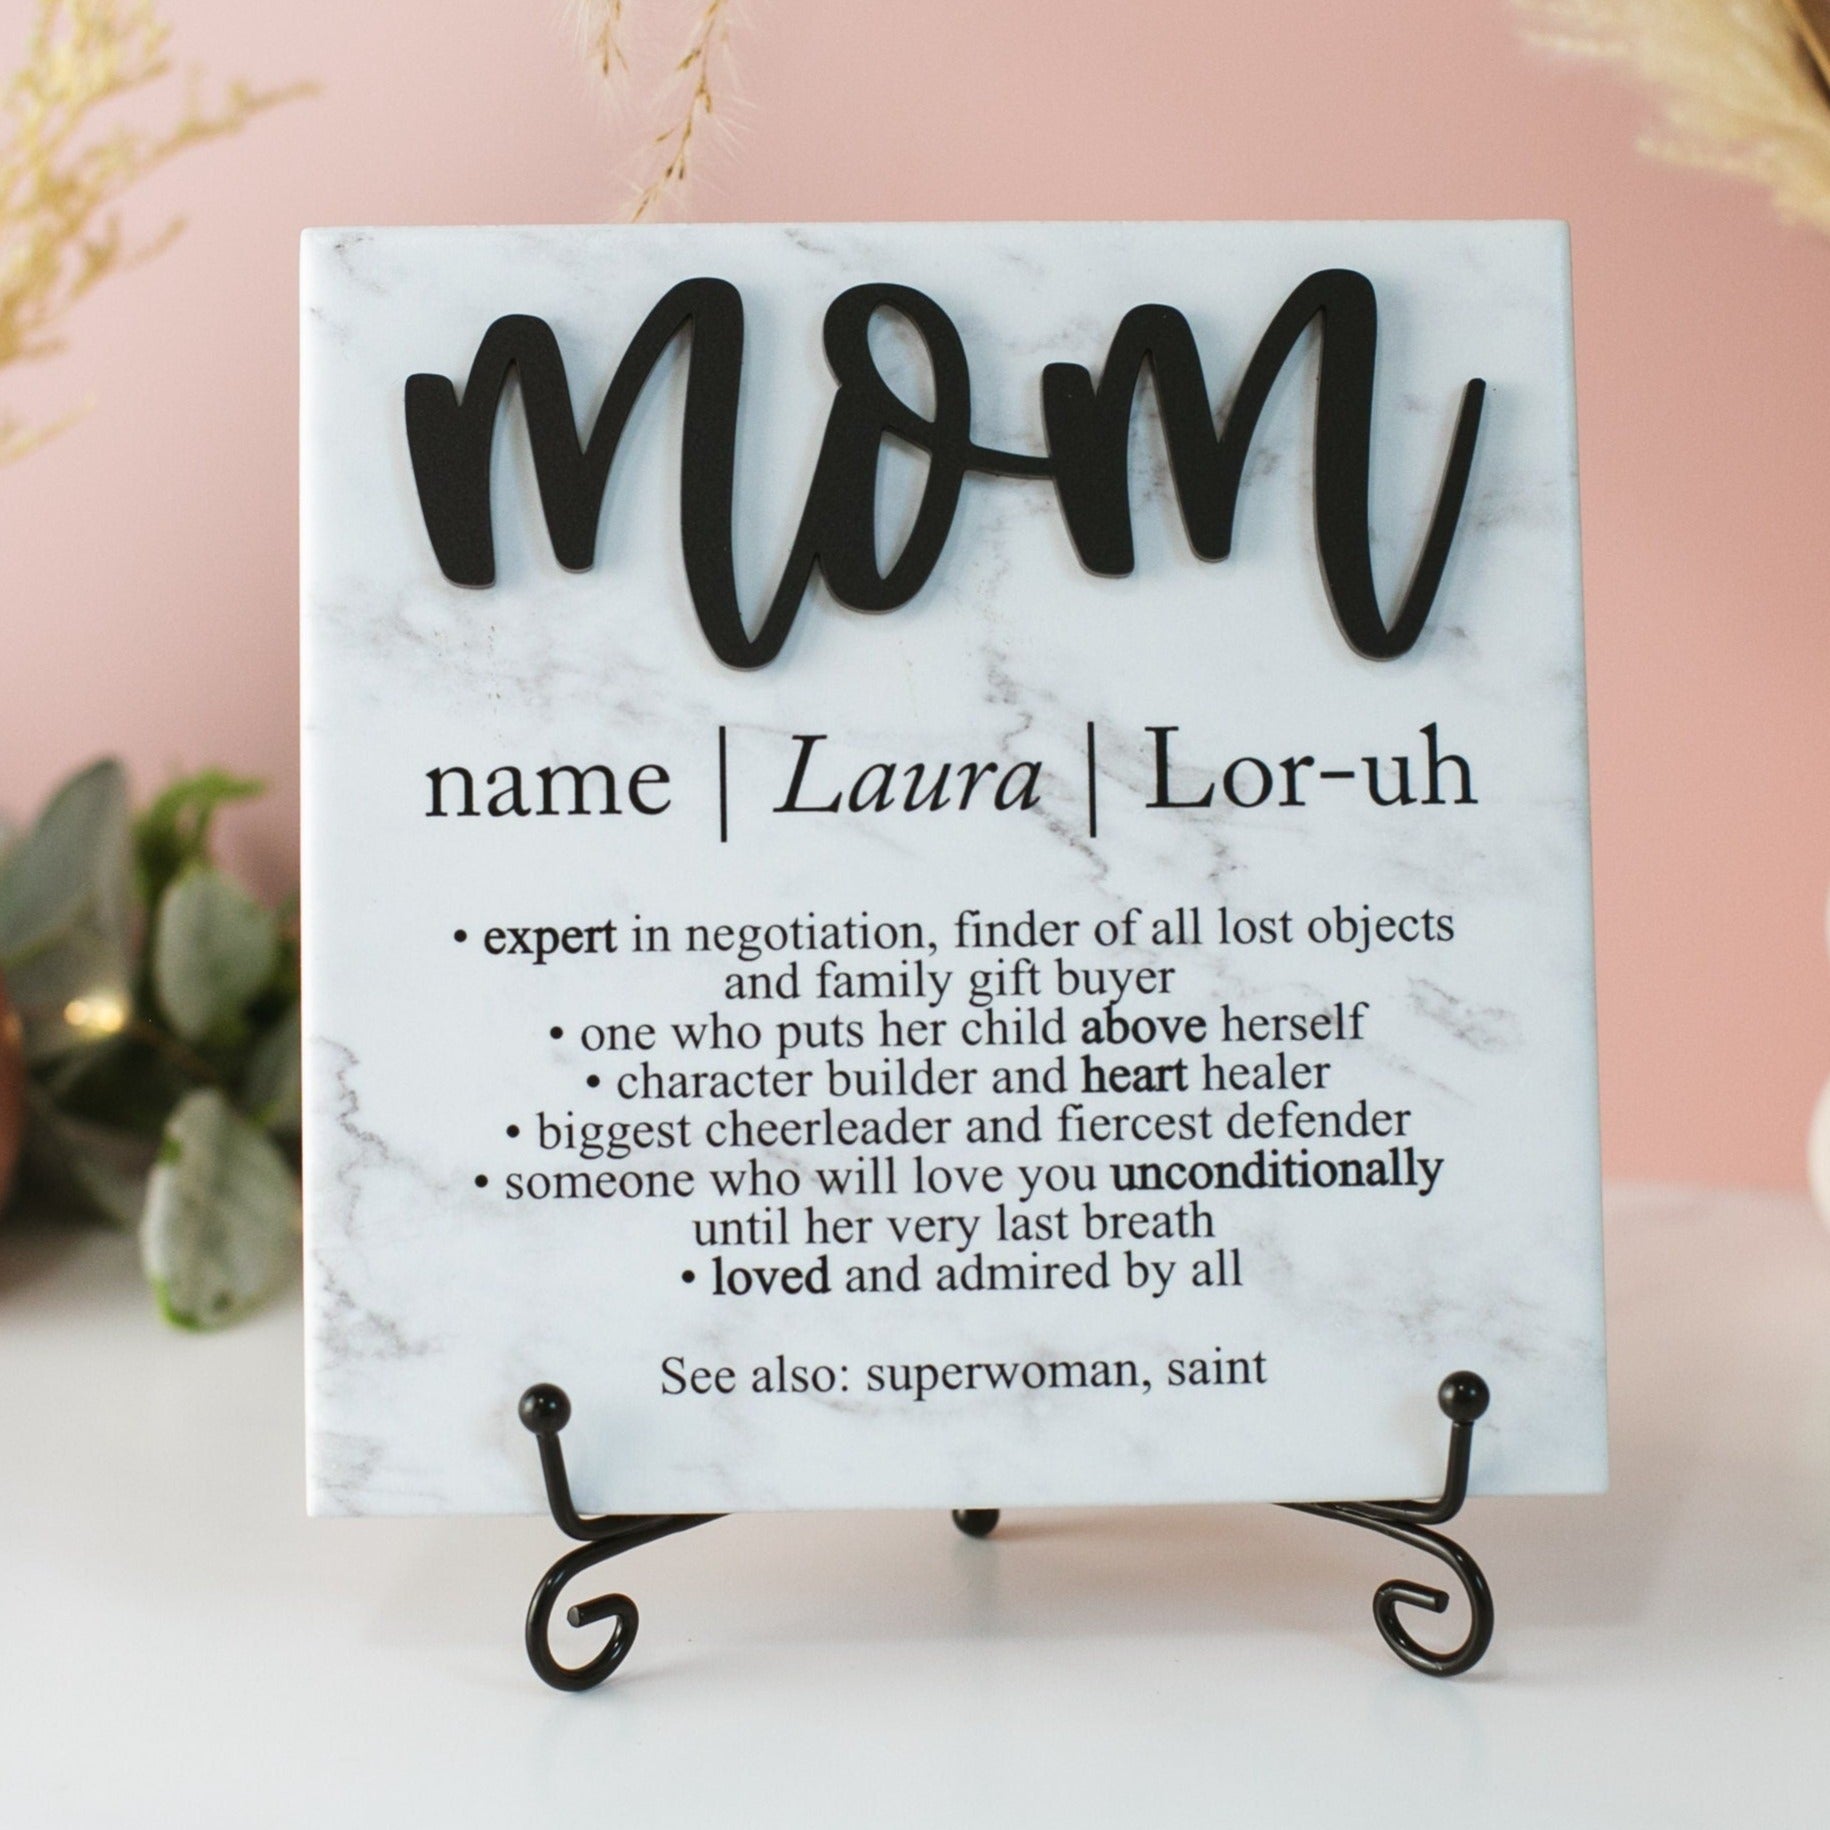 3D Mom Definition Ceramic Tile Sign Gift, Mothers Day Family Present Idea From Kids, Wall Decor, Nana, Mimi and Grandma Also Available